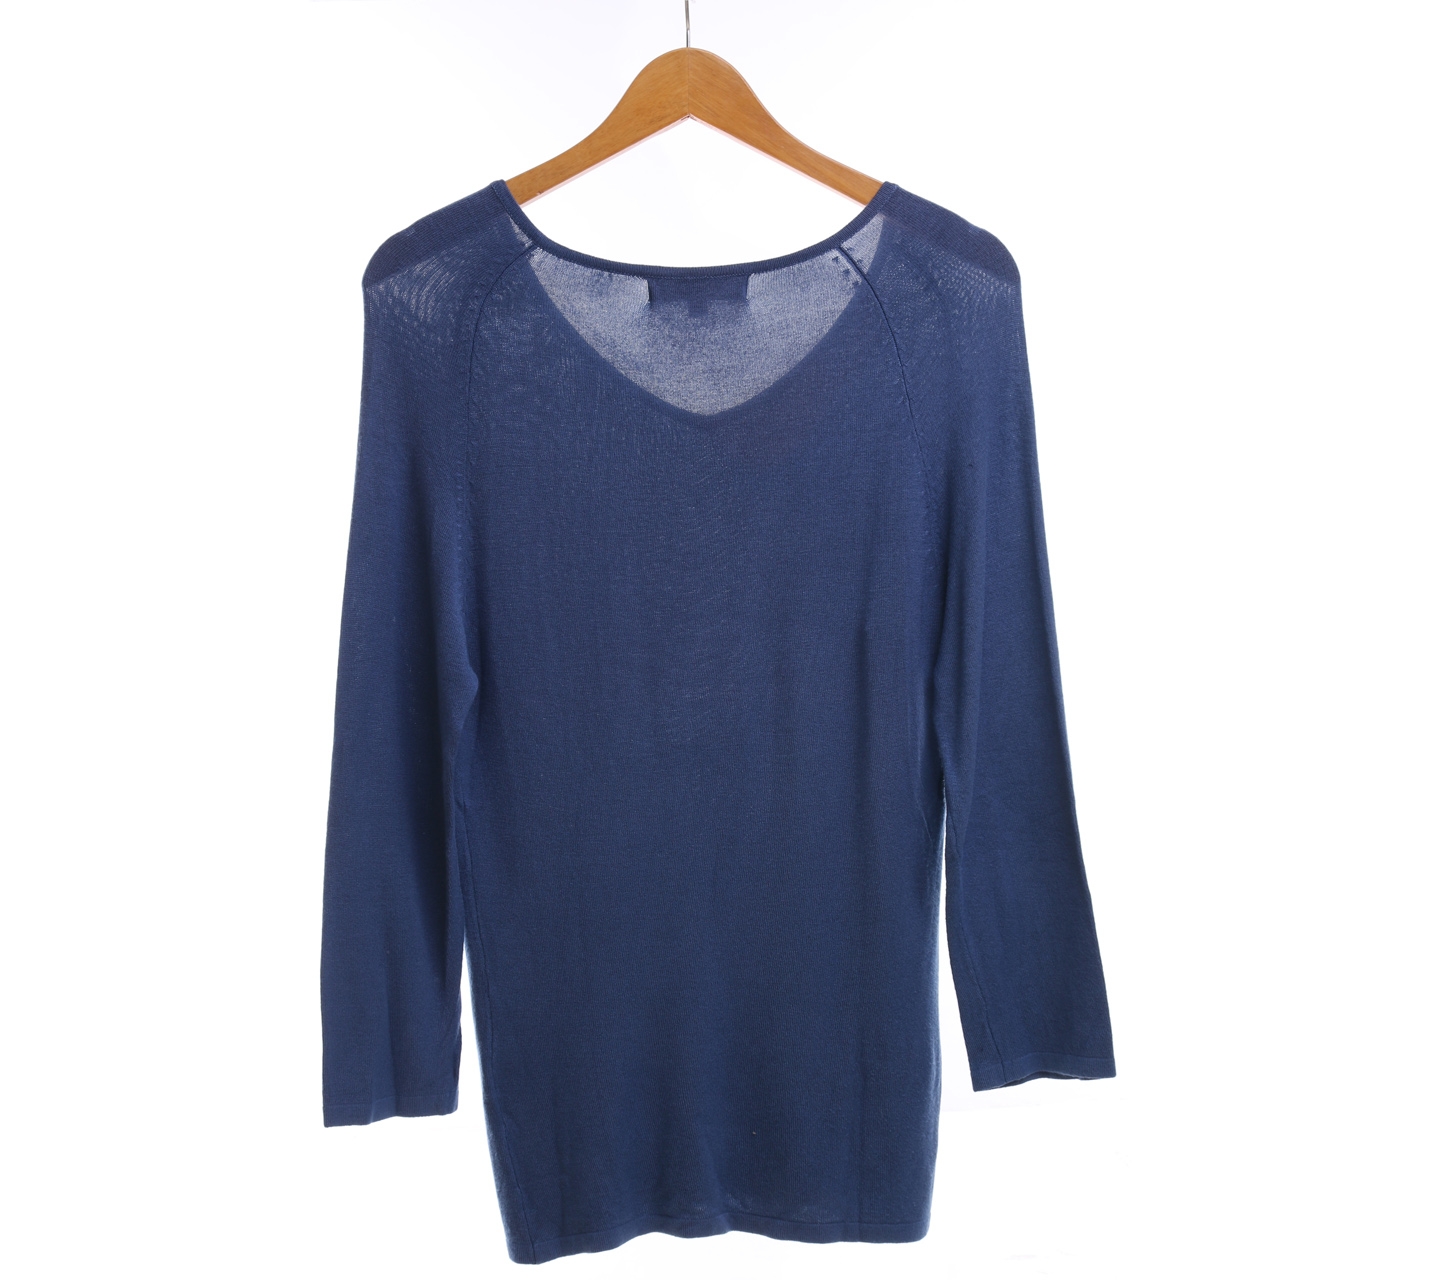 P.S. The Spirit Of Personal Style Blue Knit Blouse